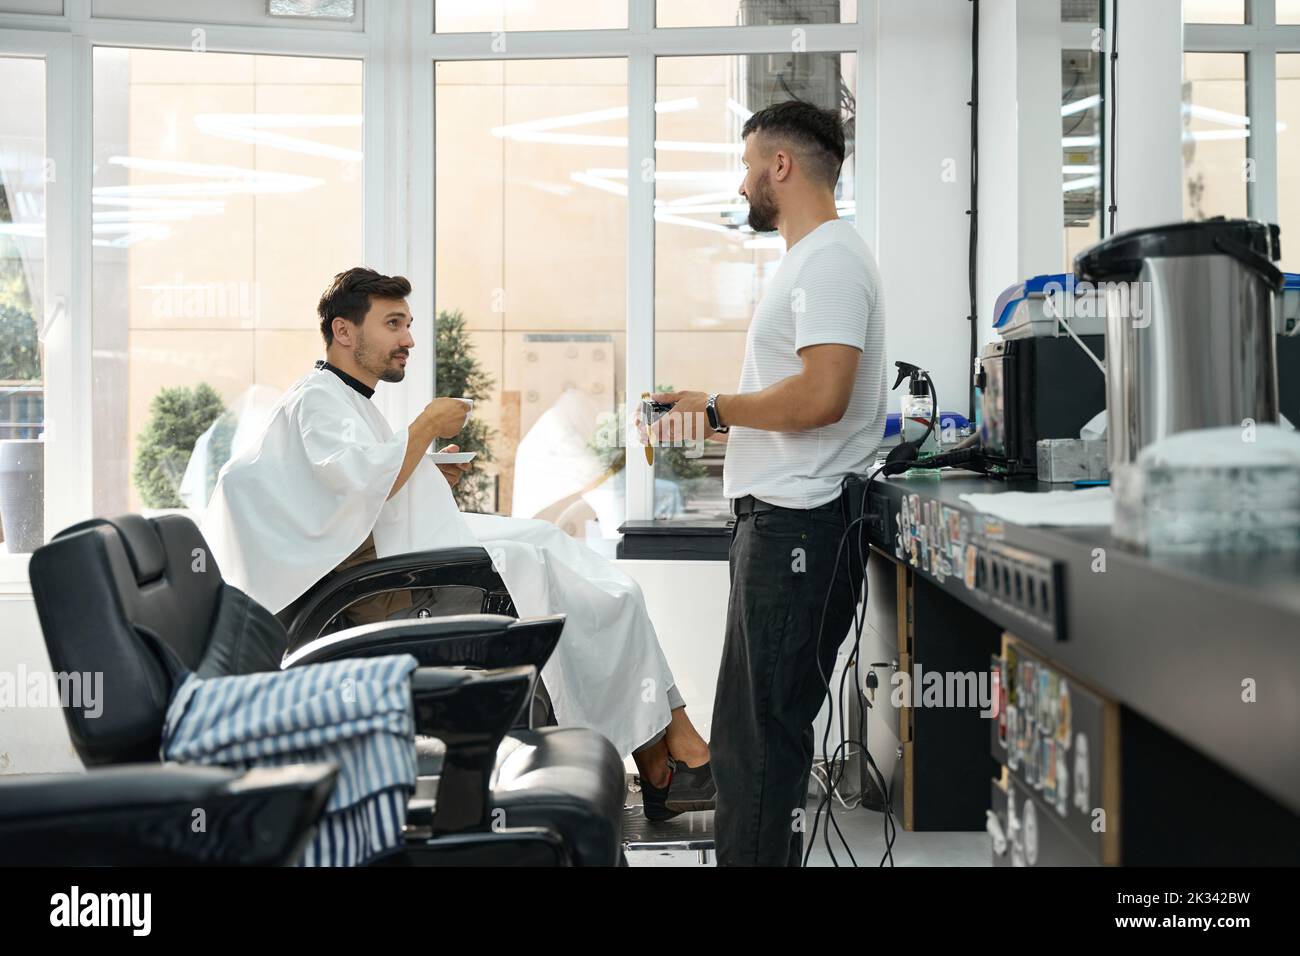 Brunette guy looking pleased with quality service at hair salon Stock Photo